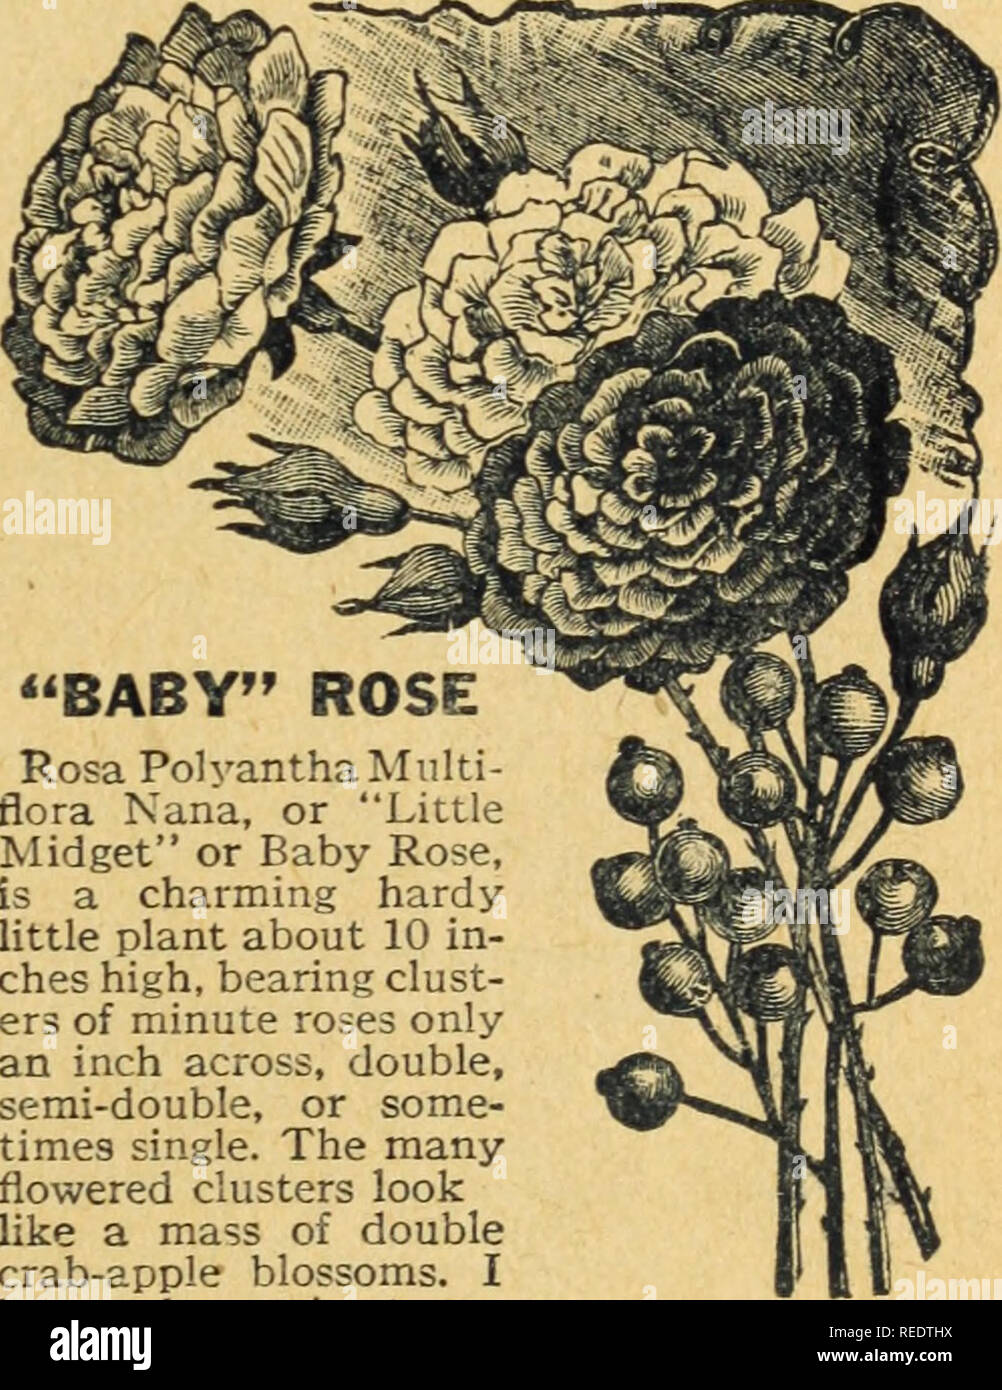 . Compliments of Miss Emma V. White. Flowers Seeds Catalogs; Seeds Catalogs; Vegetables Seeds Catalogs. ORNAMENTAL PEPPERS The cultivation of small-fruited peppers for the window or ornamental garden is exciting much at- tention and there are many new and cdd sorts which are interesting to grow besides being of u?e for sea- soning, etc. This mixture contains the popular Christmas Pepper, Tom Thumb, Little Gem.Prince of Wales, Lemon Fruits, Kaleidoscope, plum-shaped white turnin? to red; Cherry Red and Cherry Yellow with cherrylike fruits; and red Chili, small scarlet, used for &quot;pepper sau Stock Photo